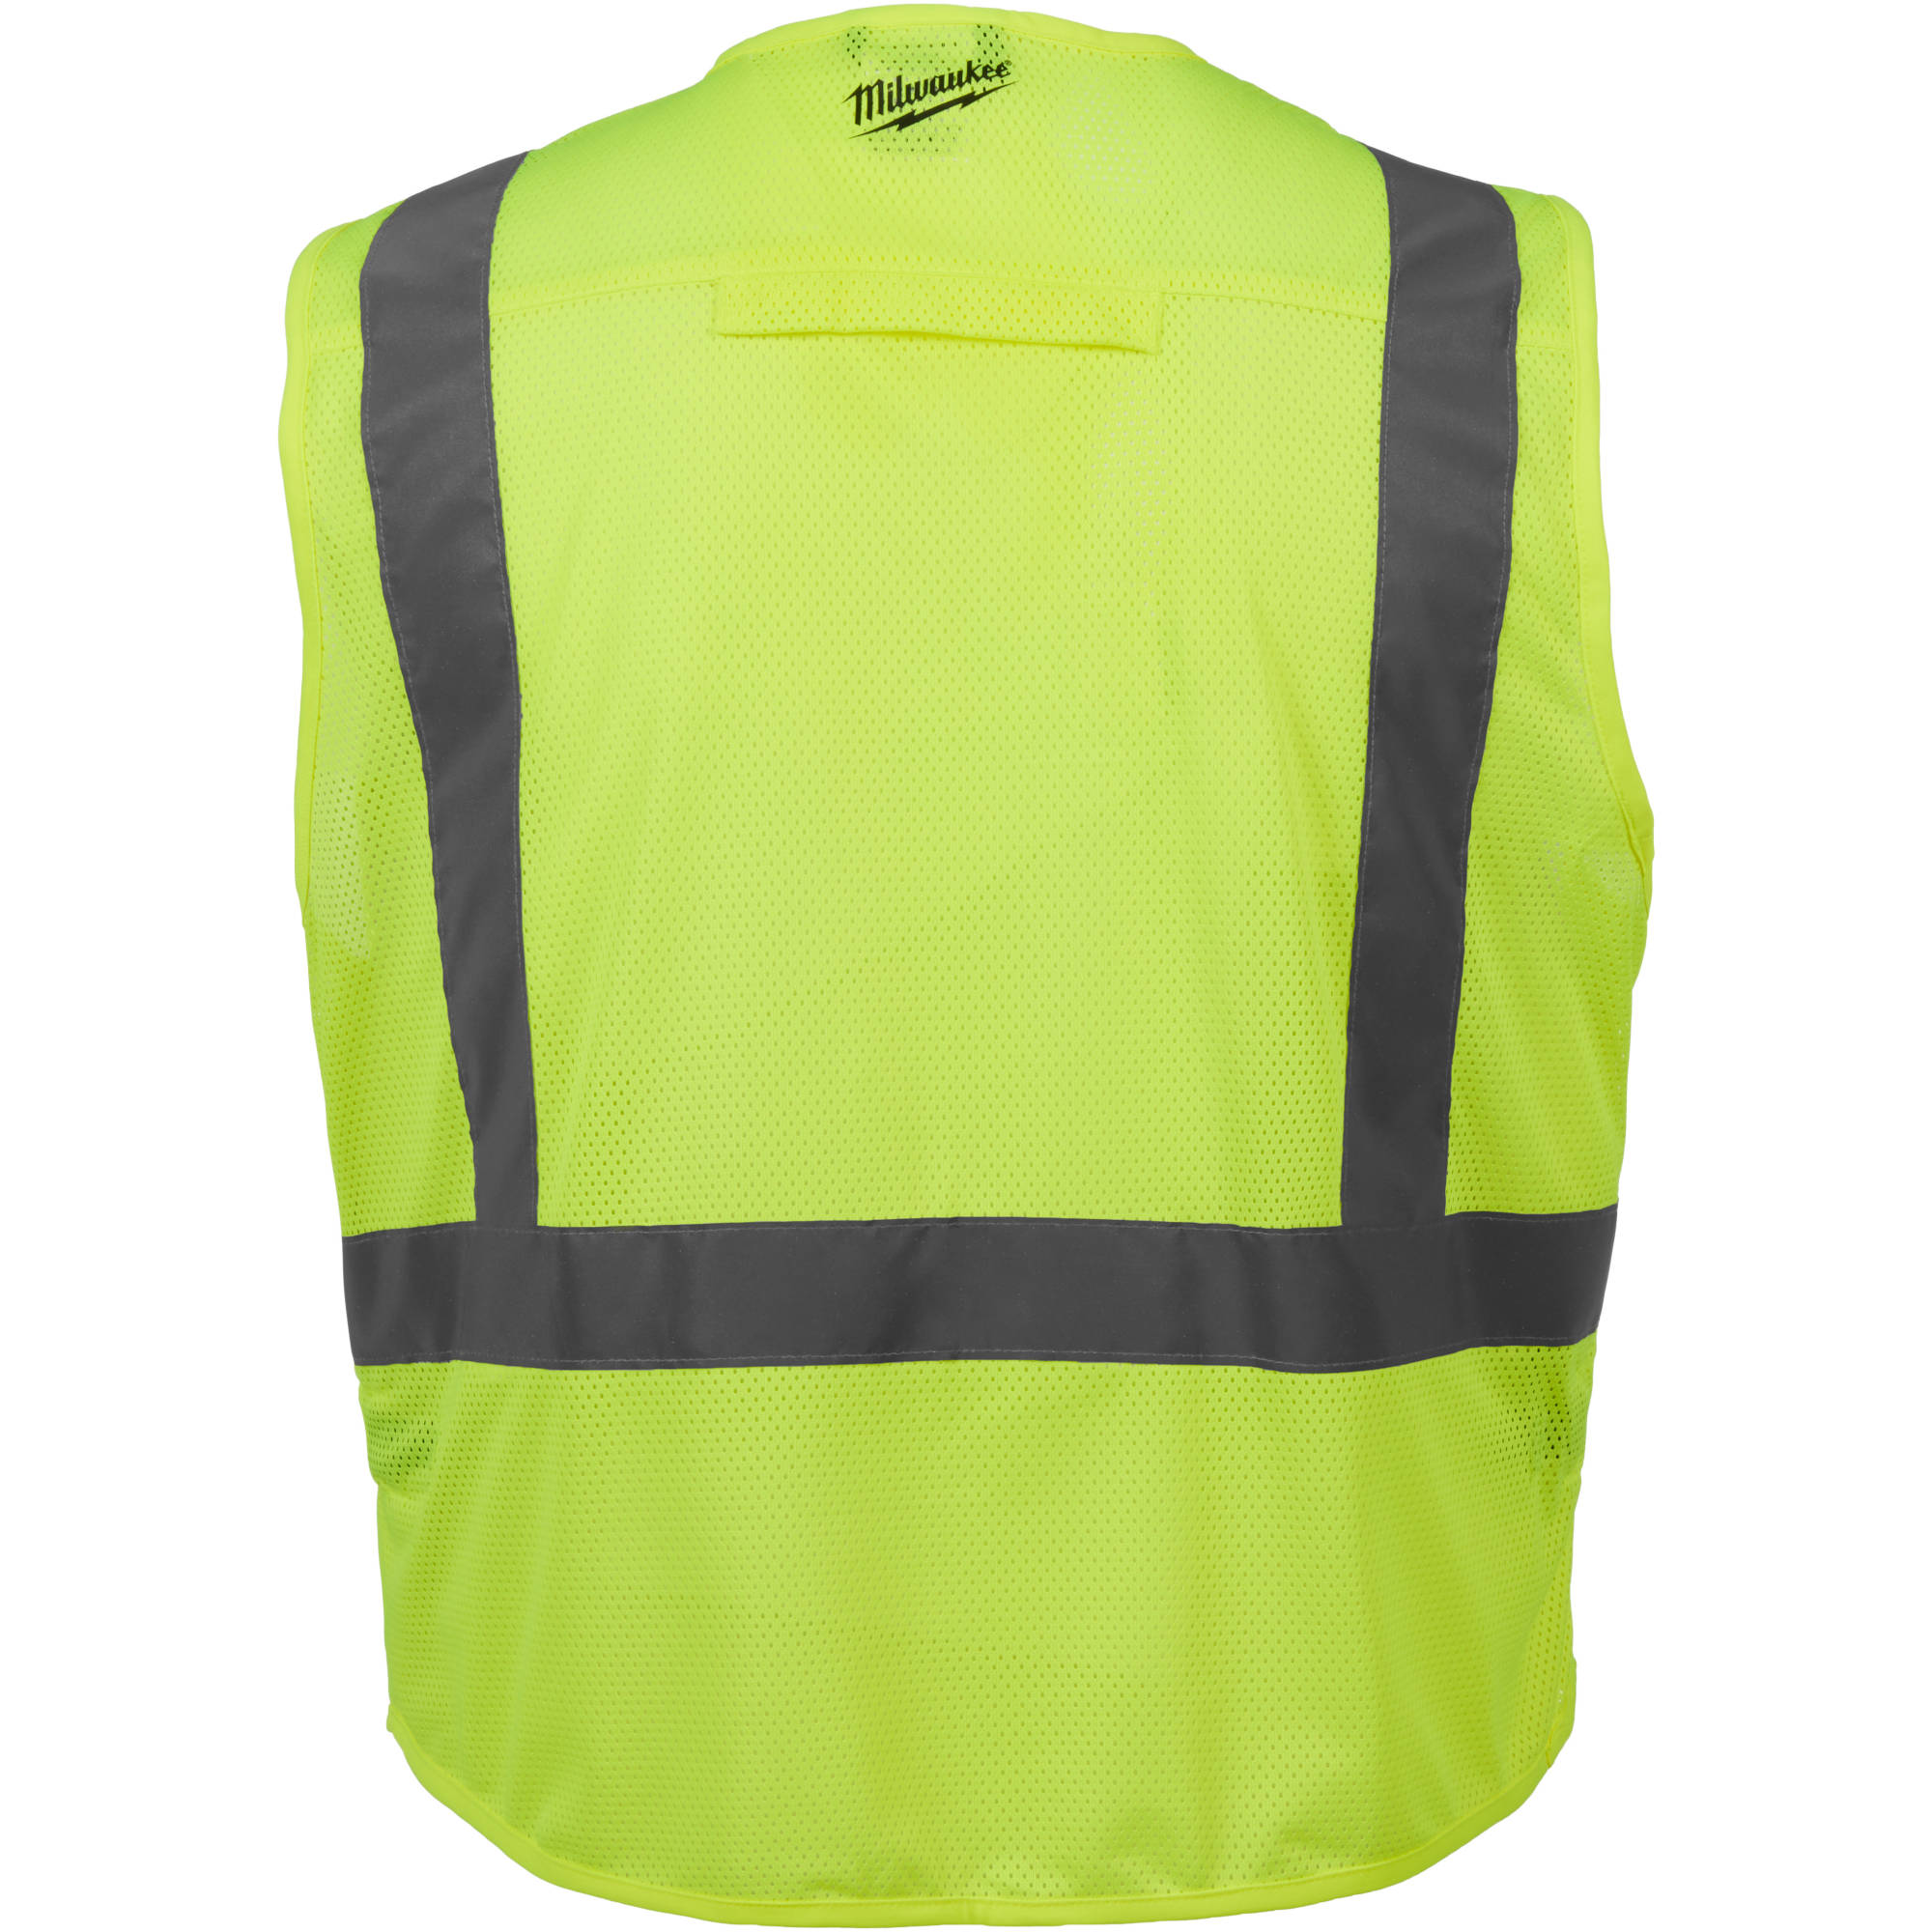 48-73-5022 Milwaukee Class 2 High Visibility Safety Vests - L-XL 3